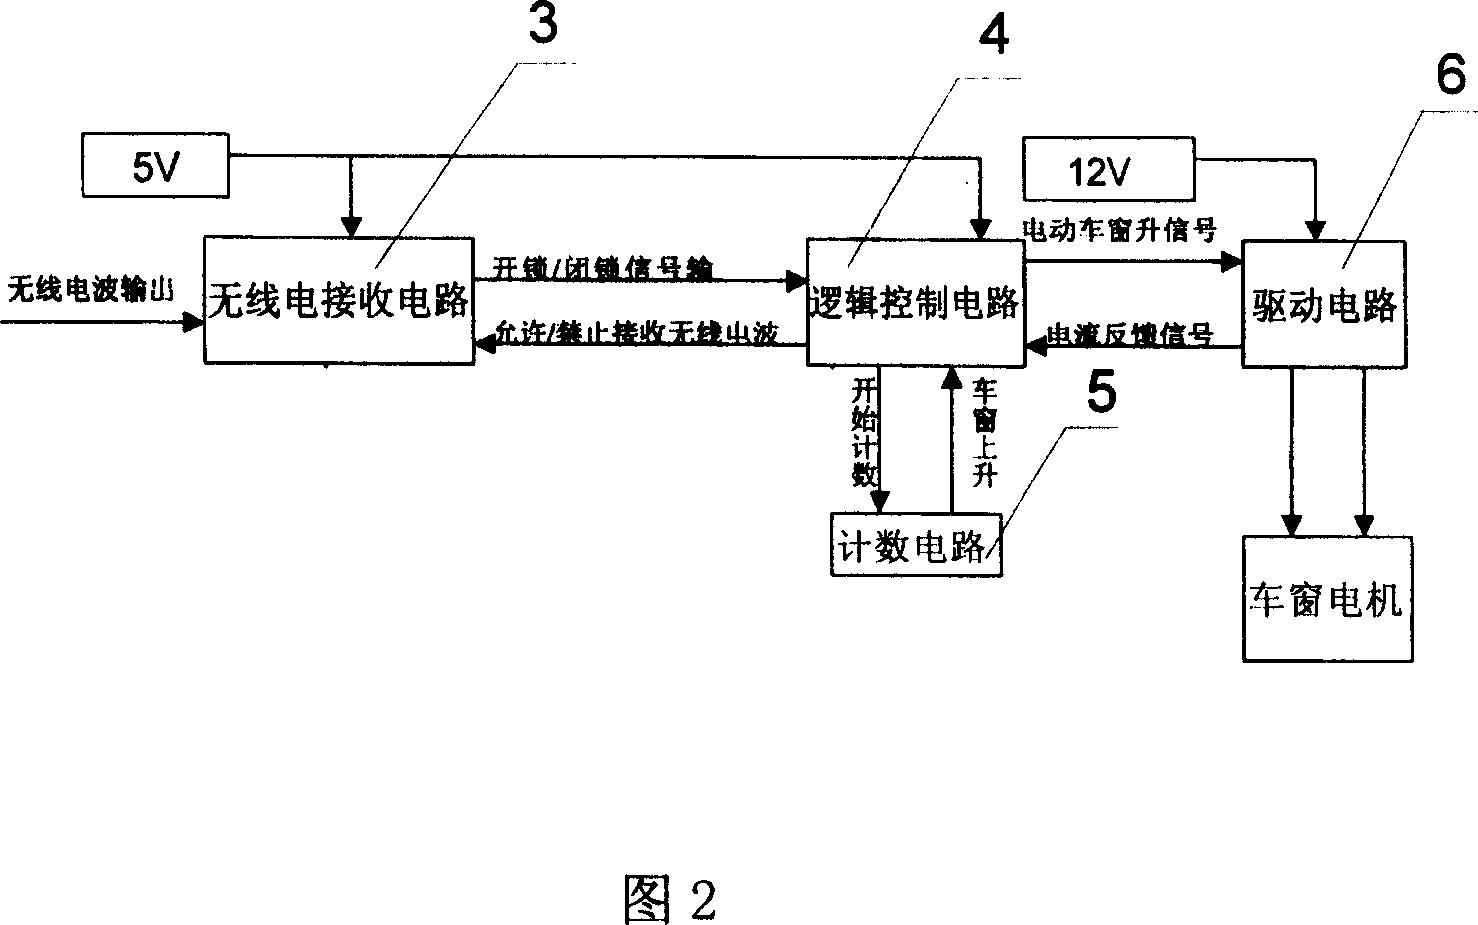 Control module for automatic lifting windows in motor vehicle, and control method